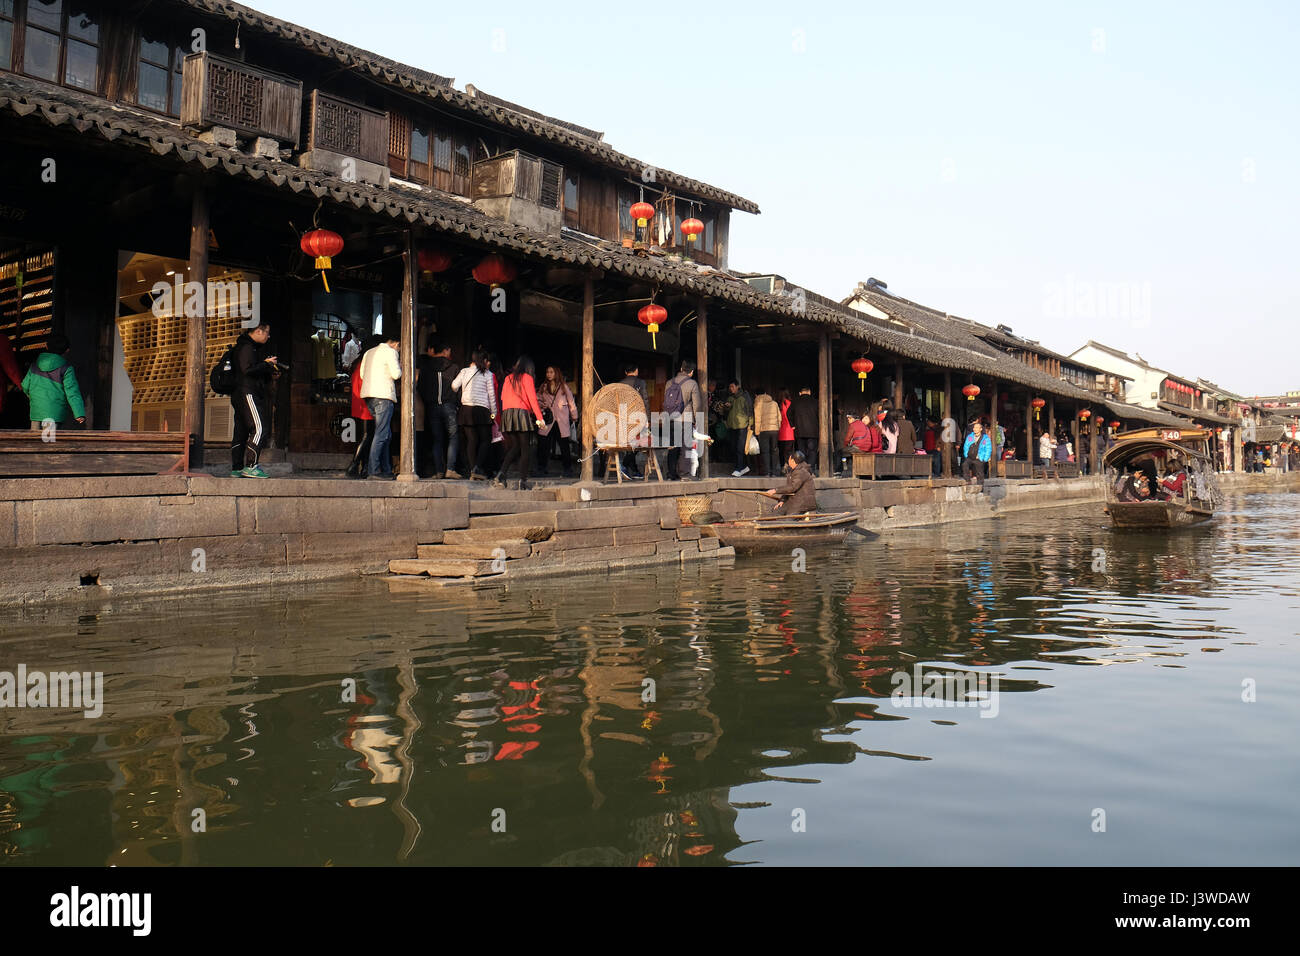 The Chinese architecture and buildings lining the water canals to Xitang town in Zhejiang Province, China, February 20, 2016. Stock Photo